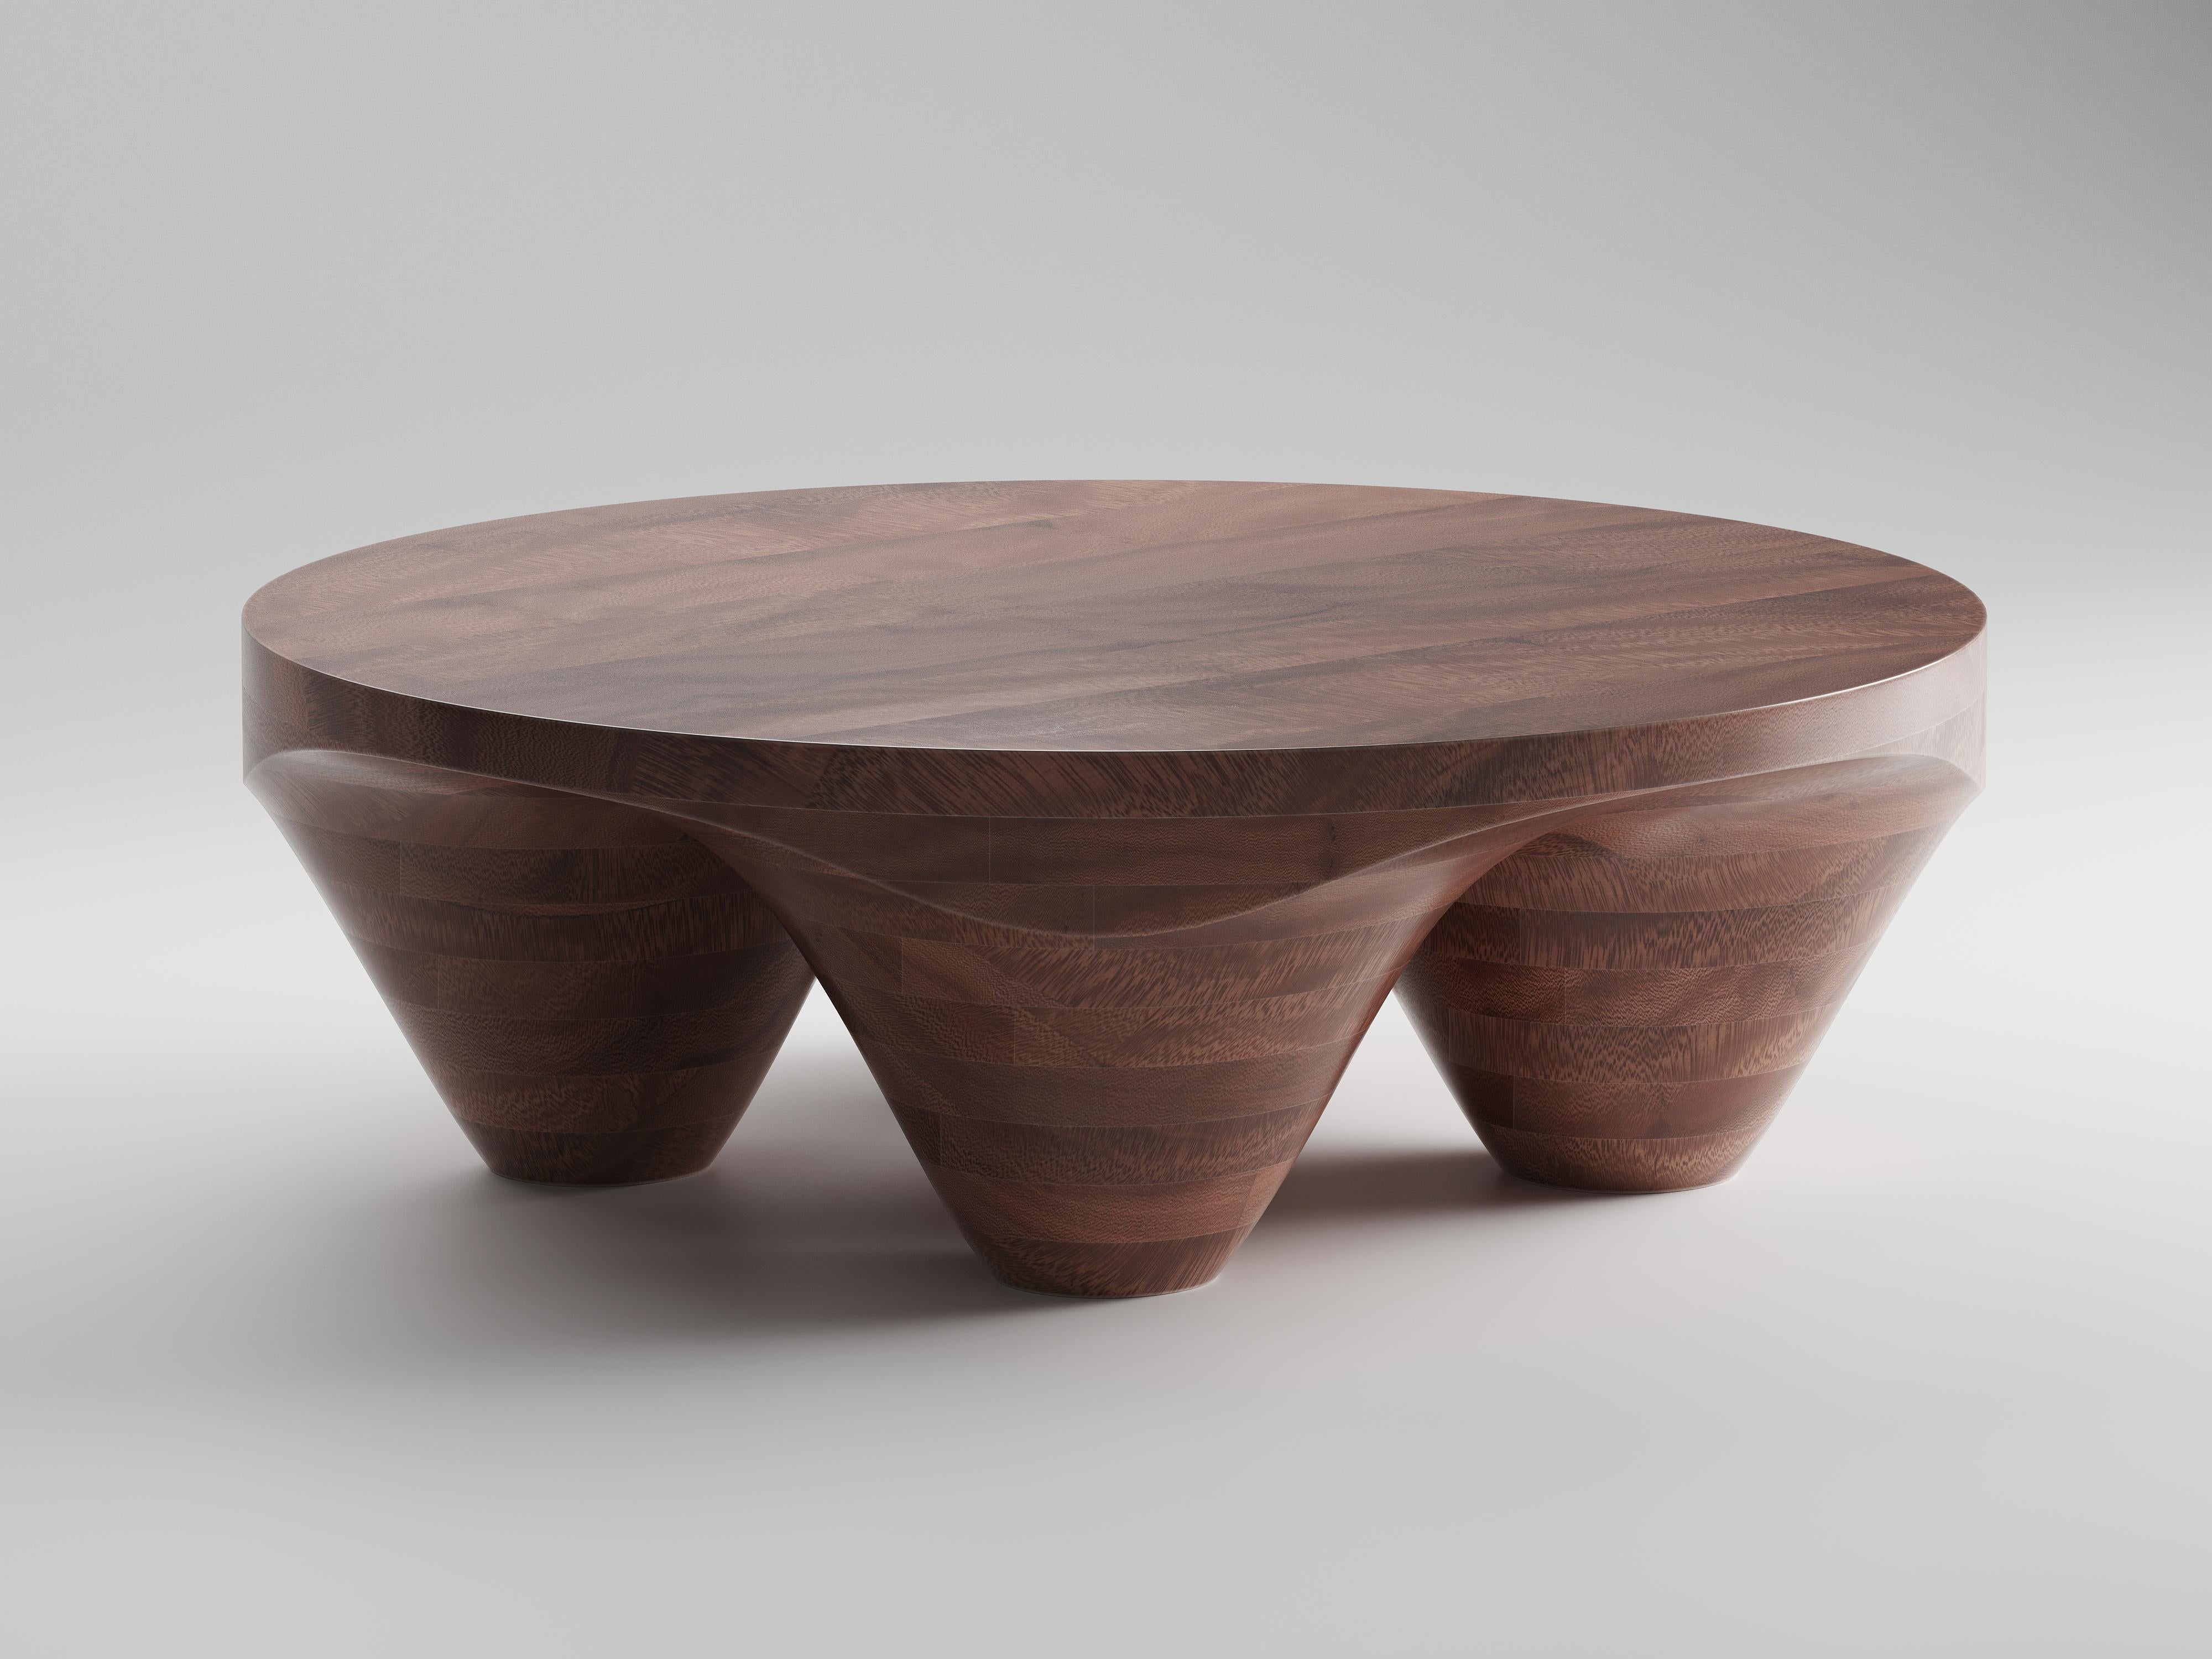 Made-to-order
Utterö Mahogany
Coffee table by Johan Wilén

A true testament to the designer’s signature style, redefining what we understand as the beauty of simplicity. Exquisite solid wood coffee table, meticulously crafted by skilled artisans.